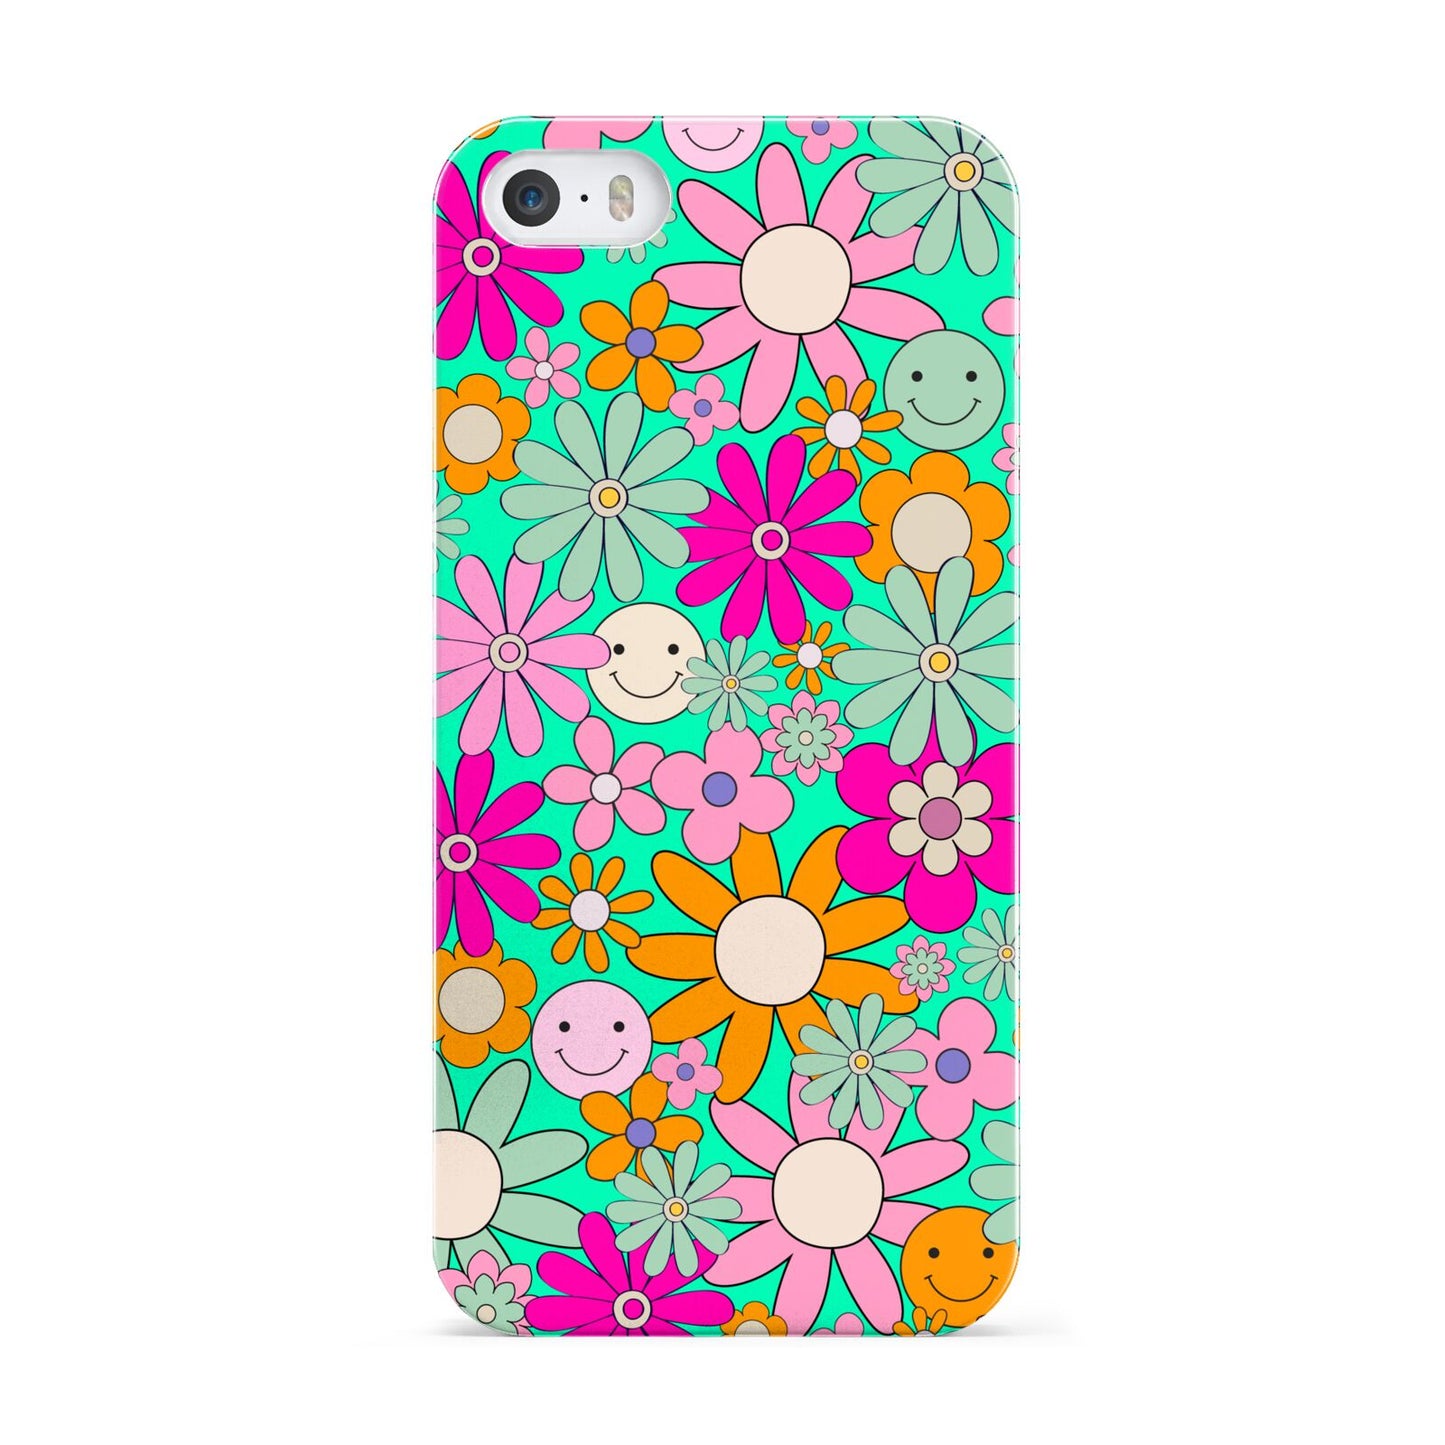 Hippy Floral Apple iPhone 5 Case